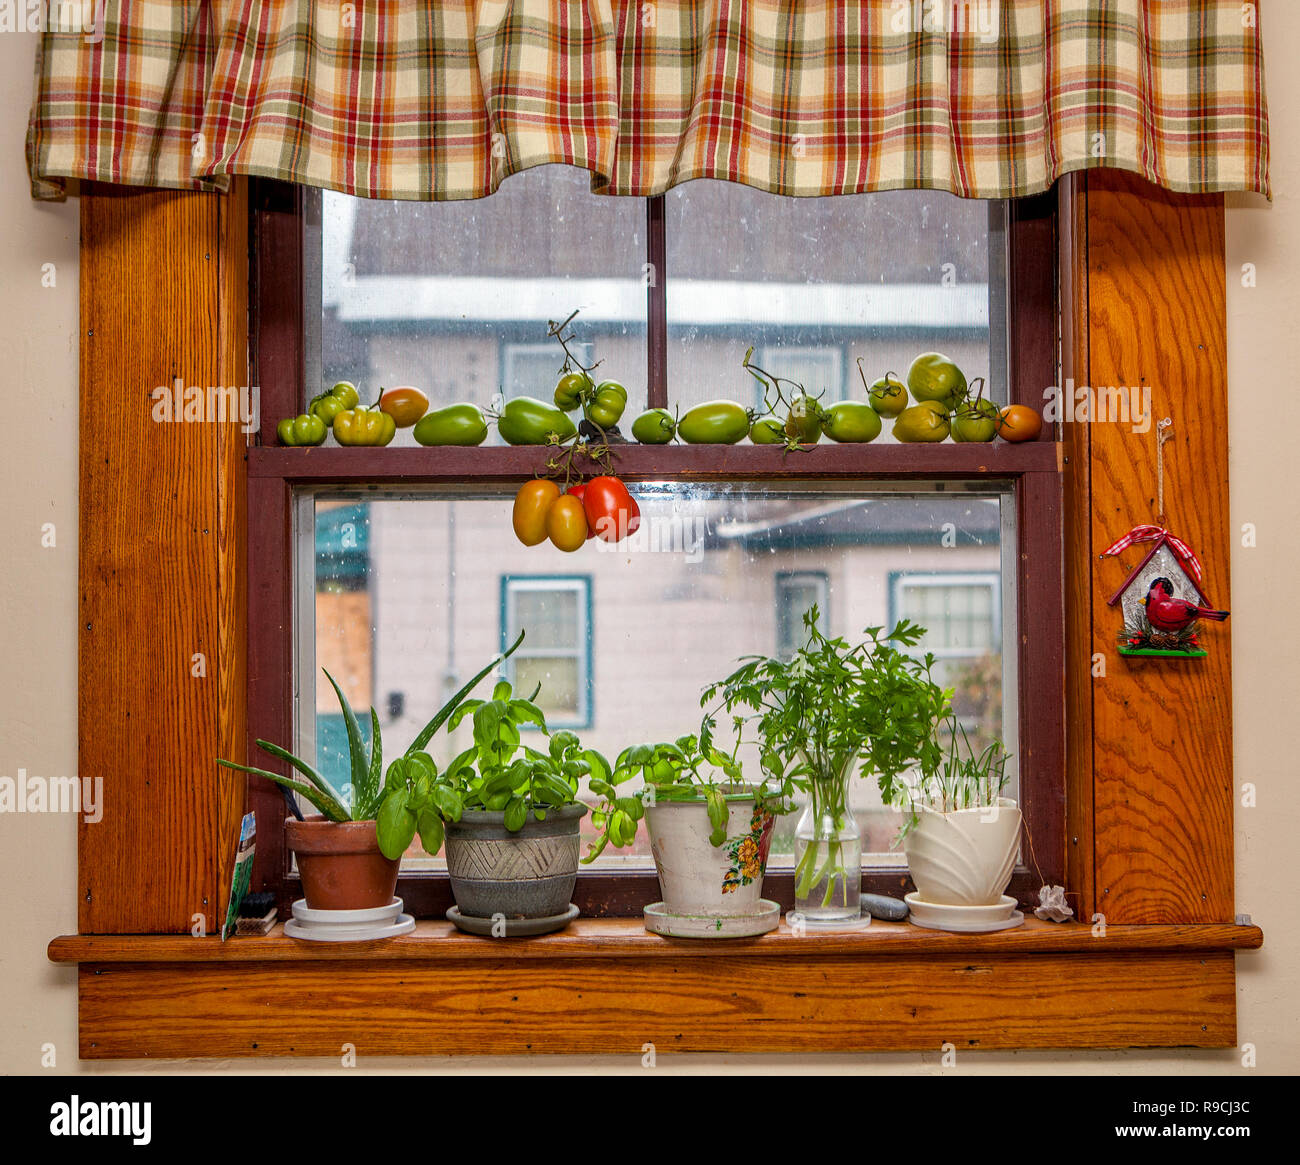 Country Home Window Sill Herbs Pots Tomatoes Stock Photo